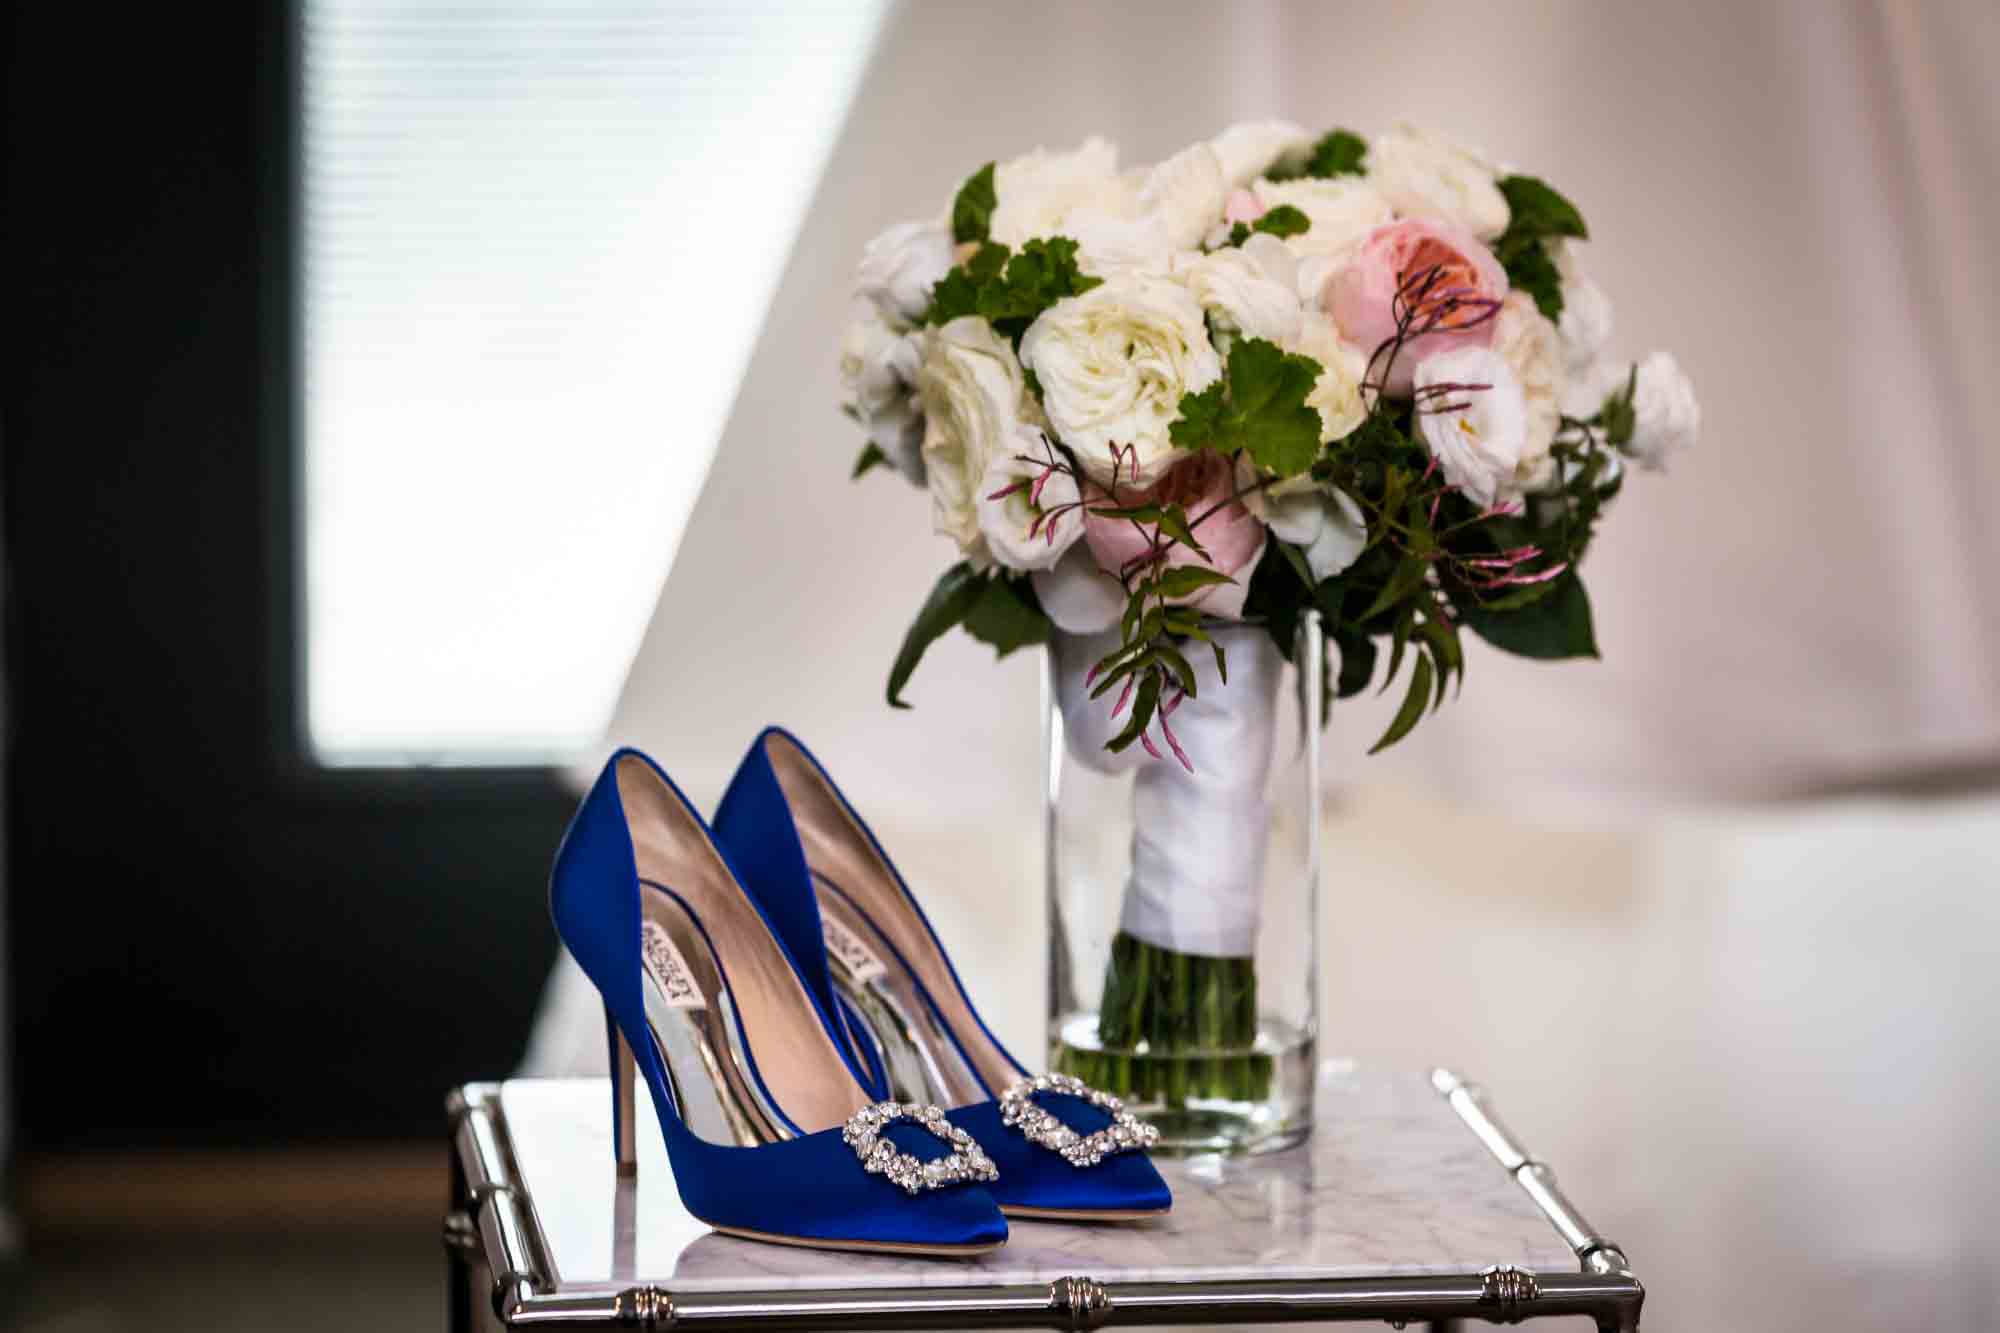 Table holding blue shoes with rhinestone clips and vase with pink flower bouquet